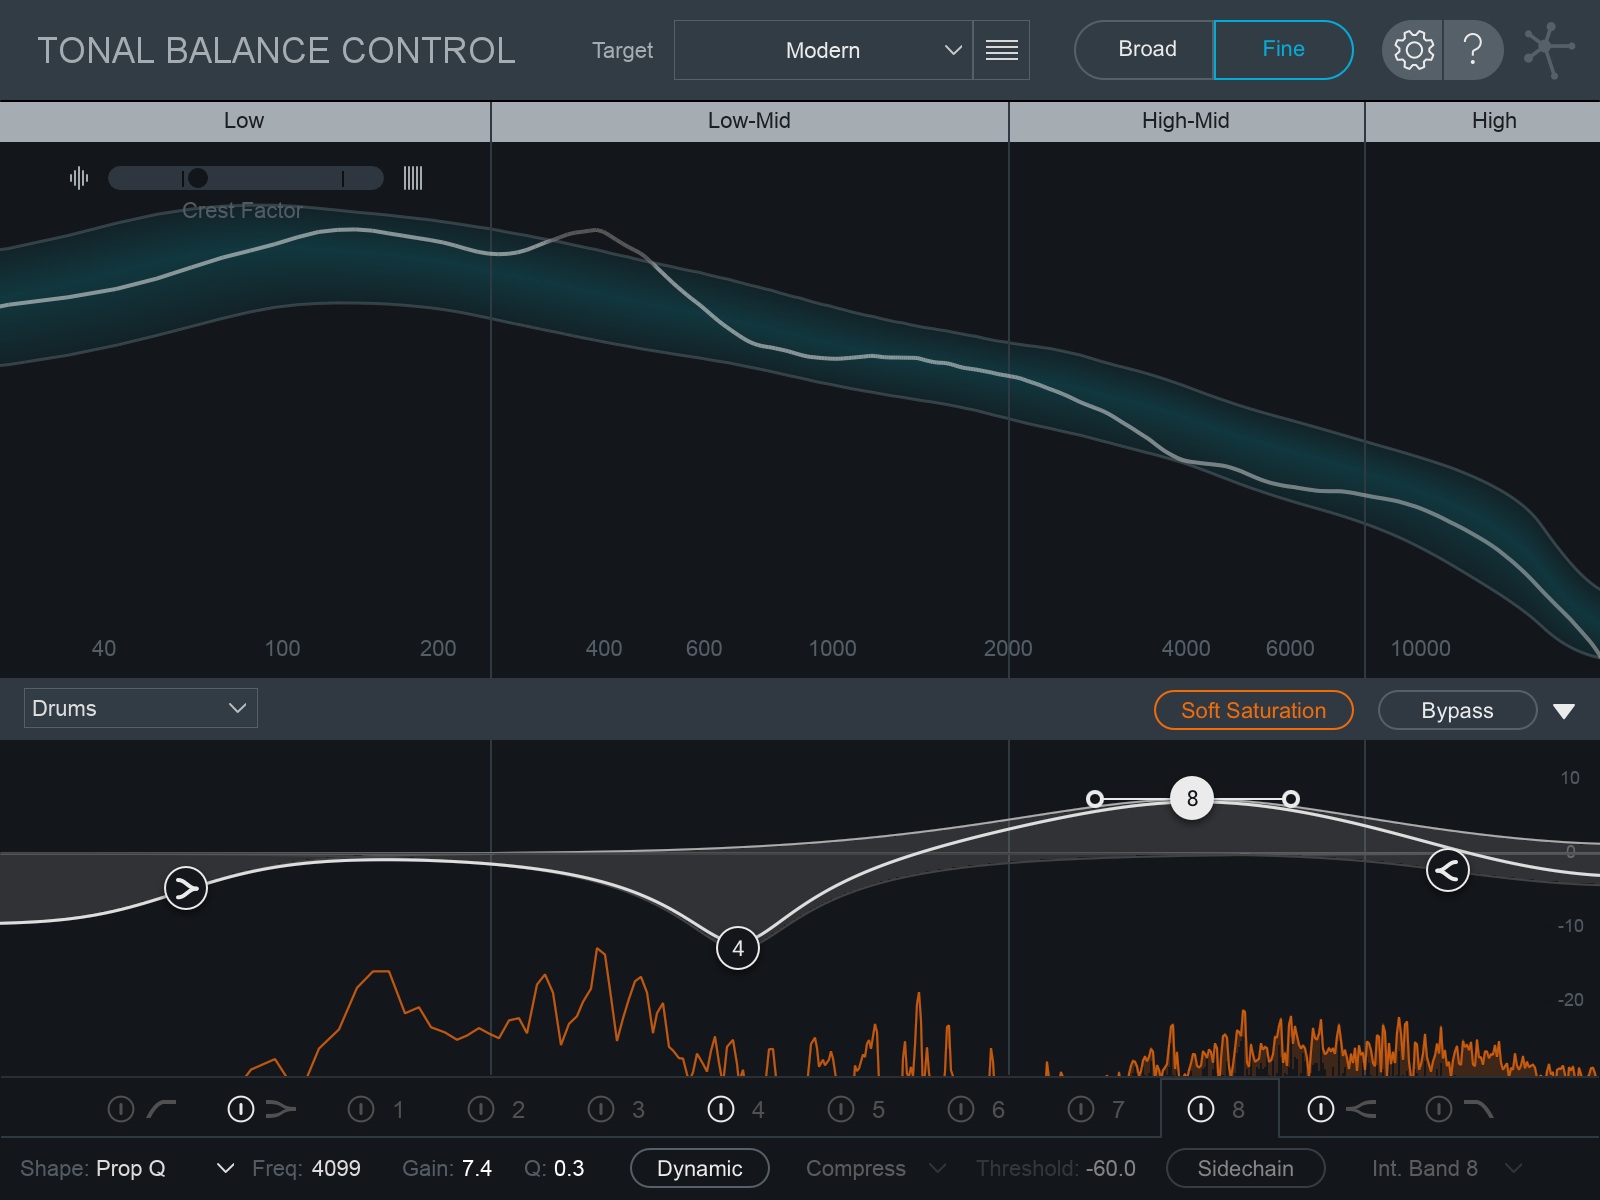 New Gear Alert: iZotope’s Tonal Balance Control 2, Saturn 2 by FabFilter, Eventide’s Rotary Mod & More